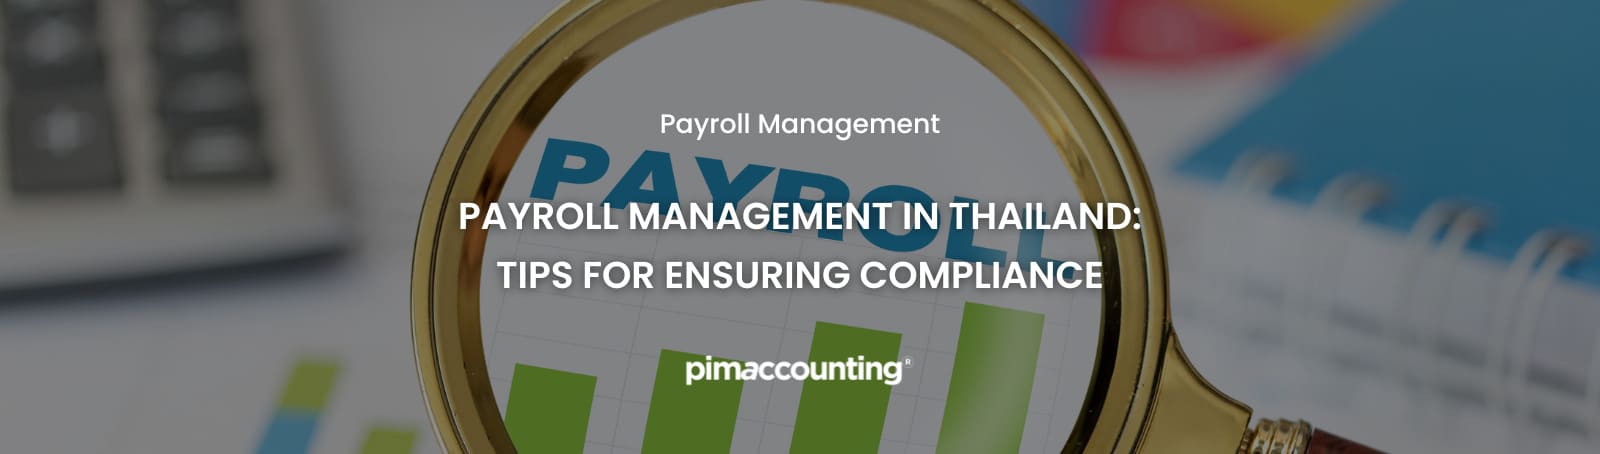 Payroll Management in Thailand: Tips for Ensuring Compliancent - Pimaccounting